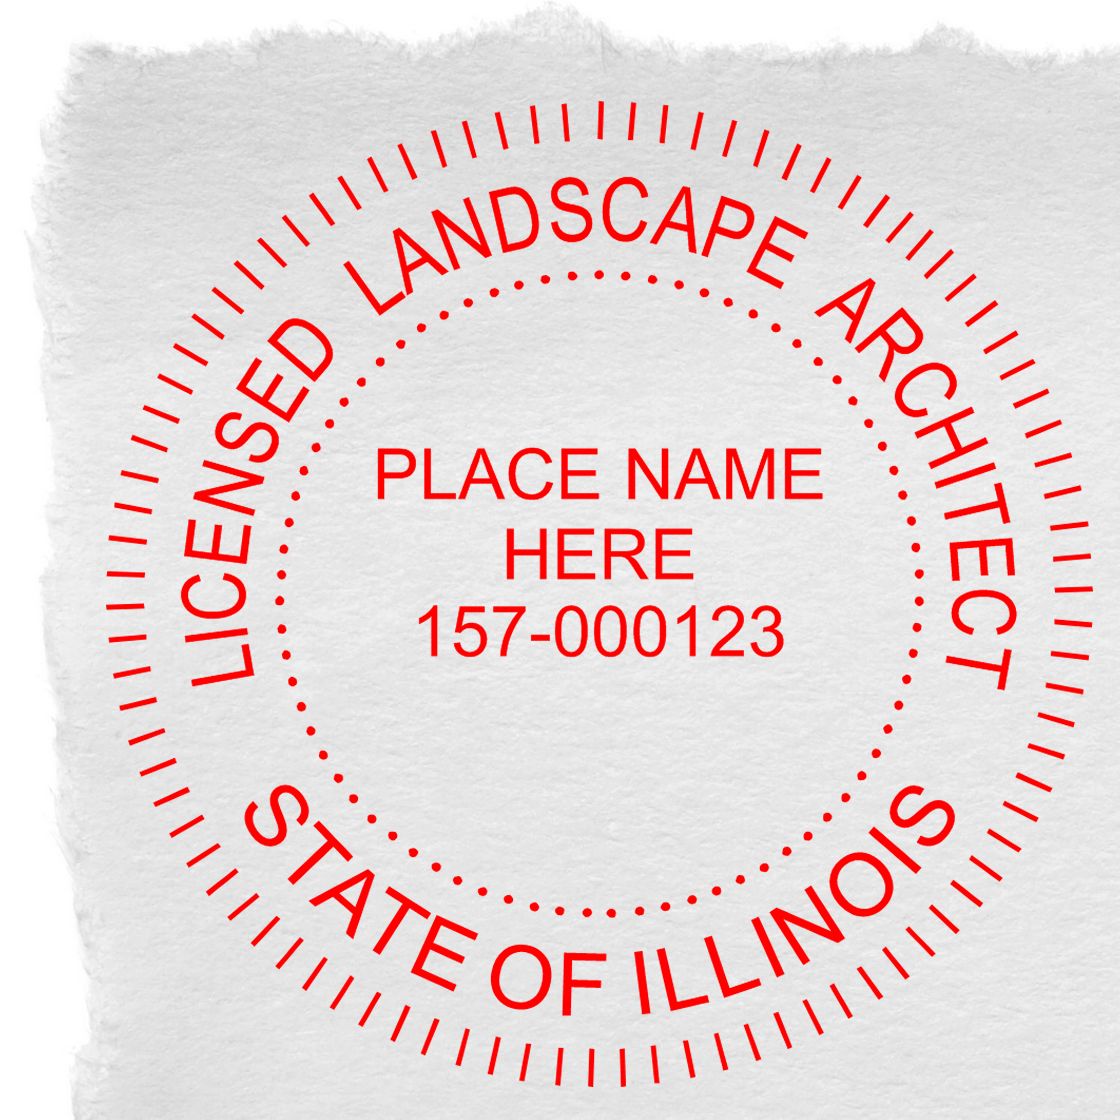 The Illinois Landscape Architectural Seal Stamp stamp impression comes to life with a crisp, detailed photo on paper - showcasing true professional quality.